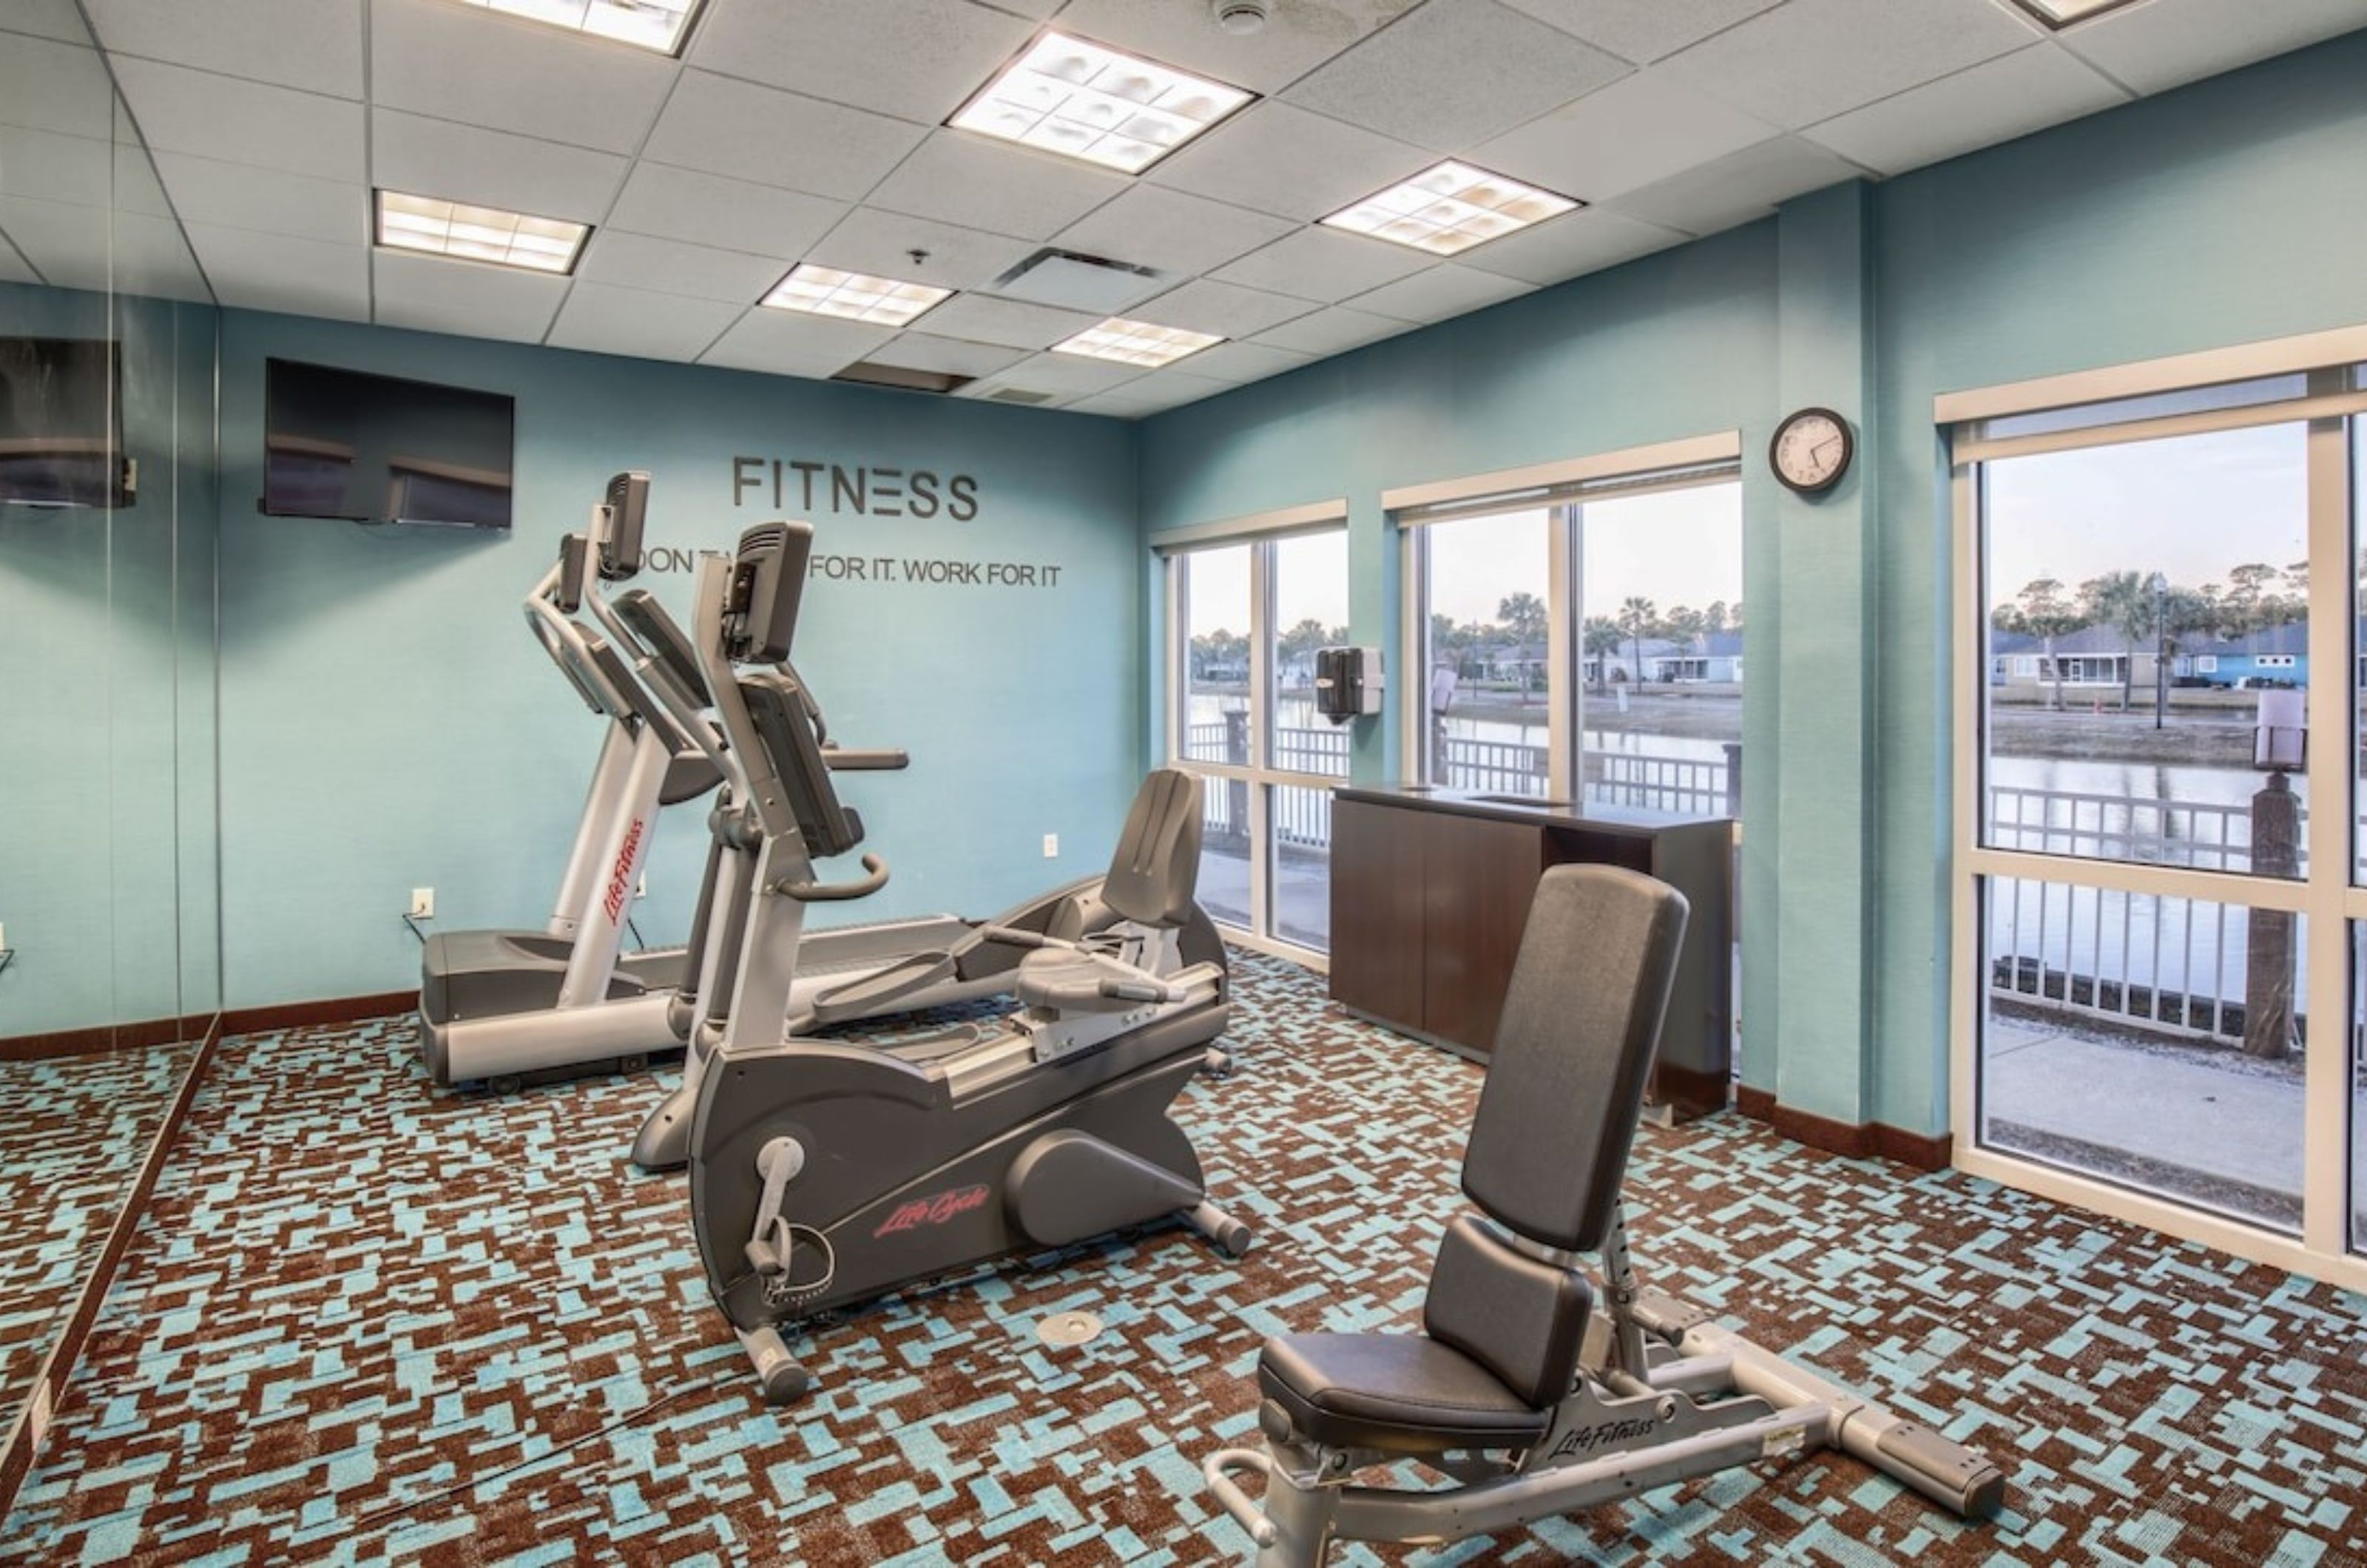 Cardio equipment and a workout bench in the fitness center at Fairfield Inn and Suites 